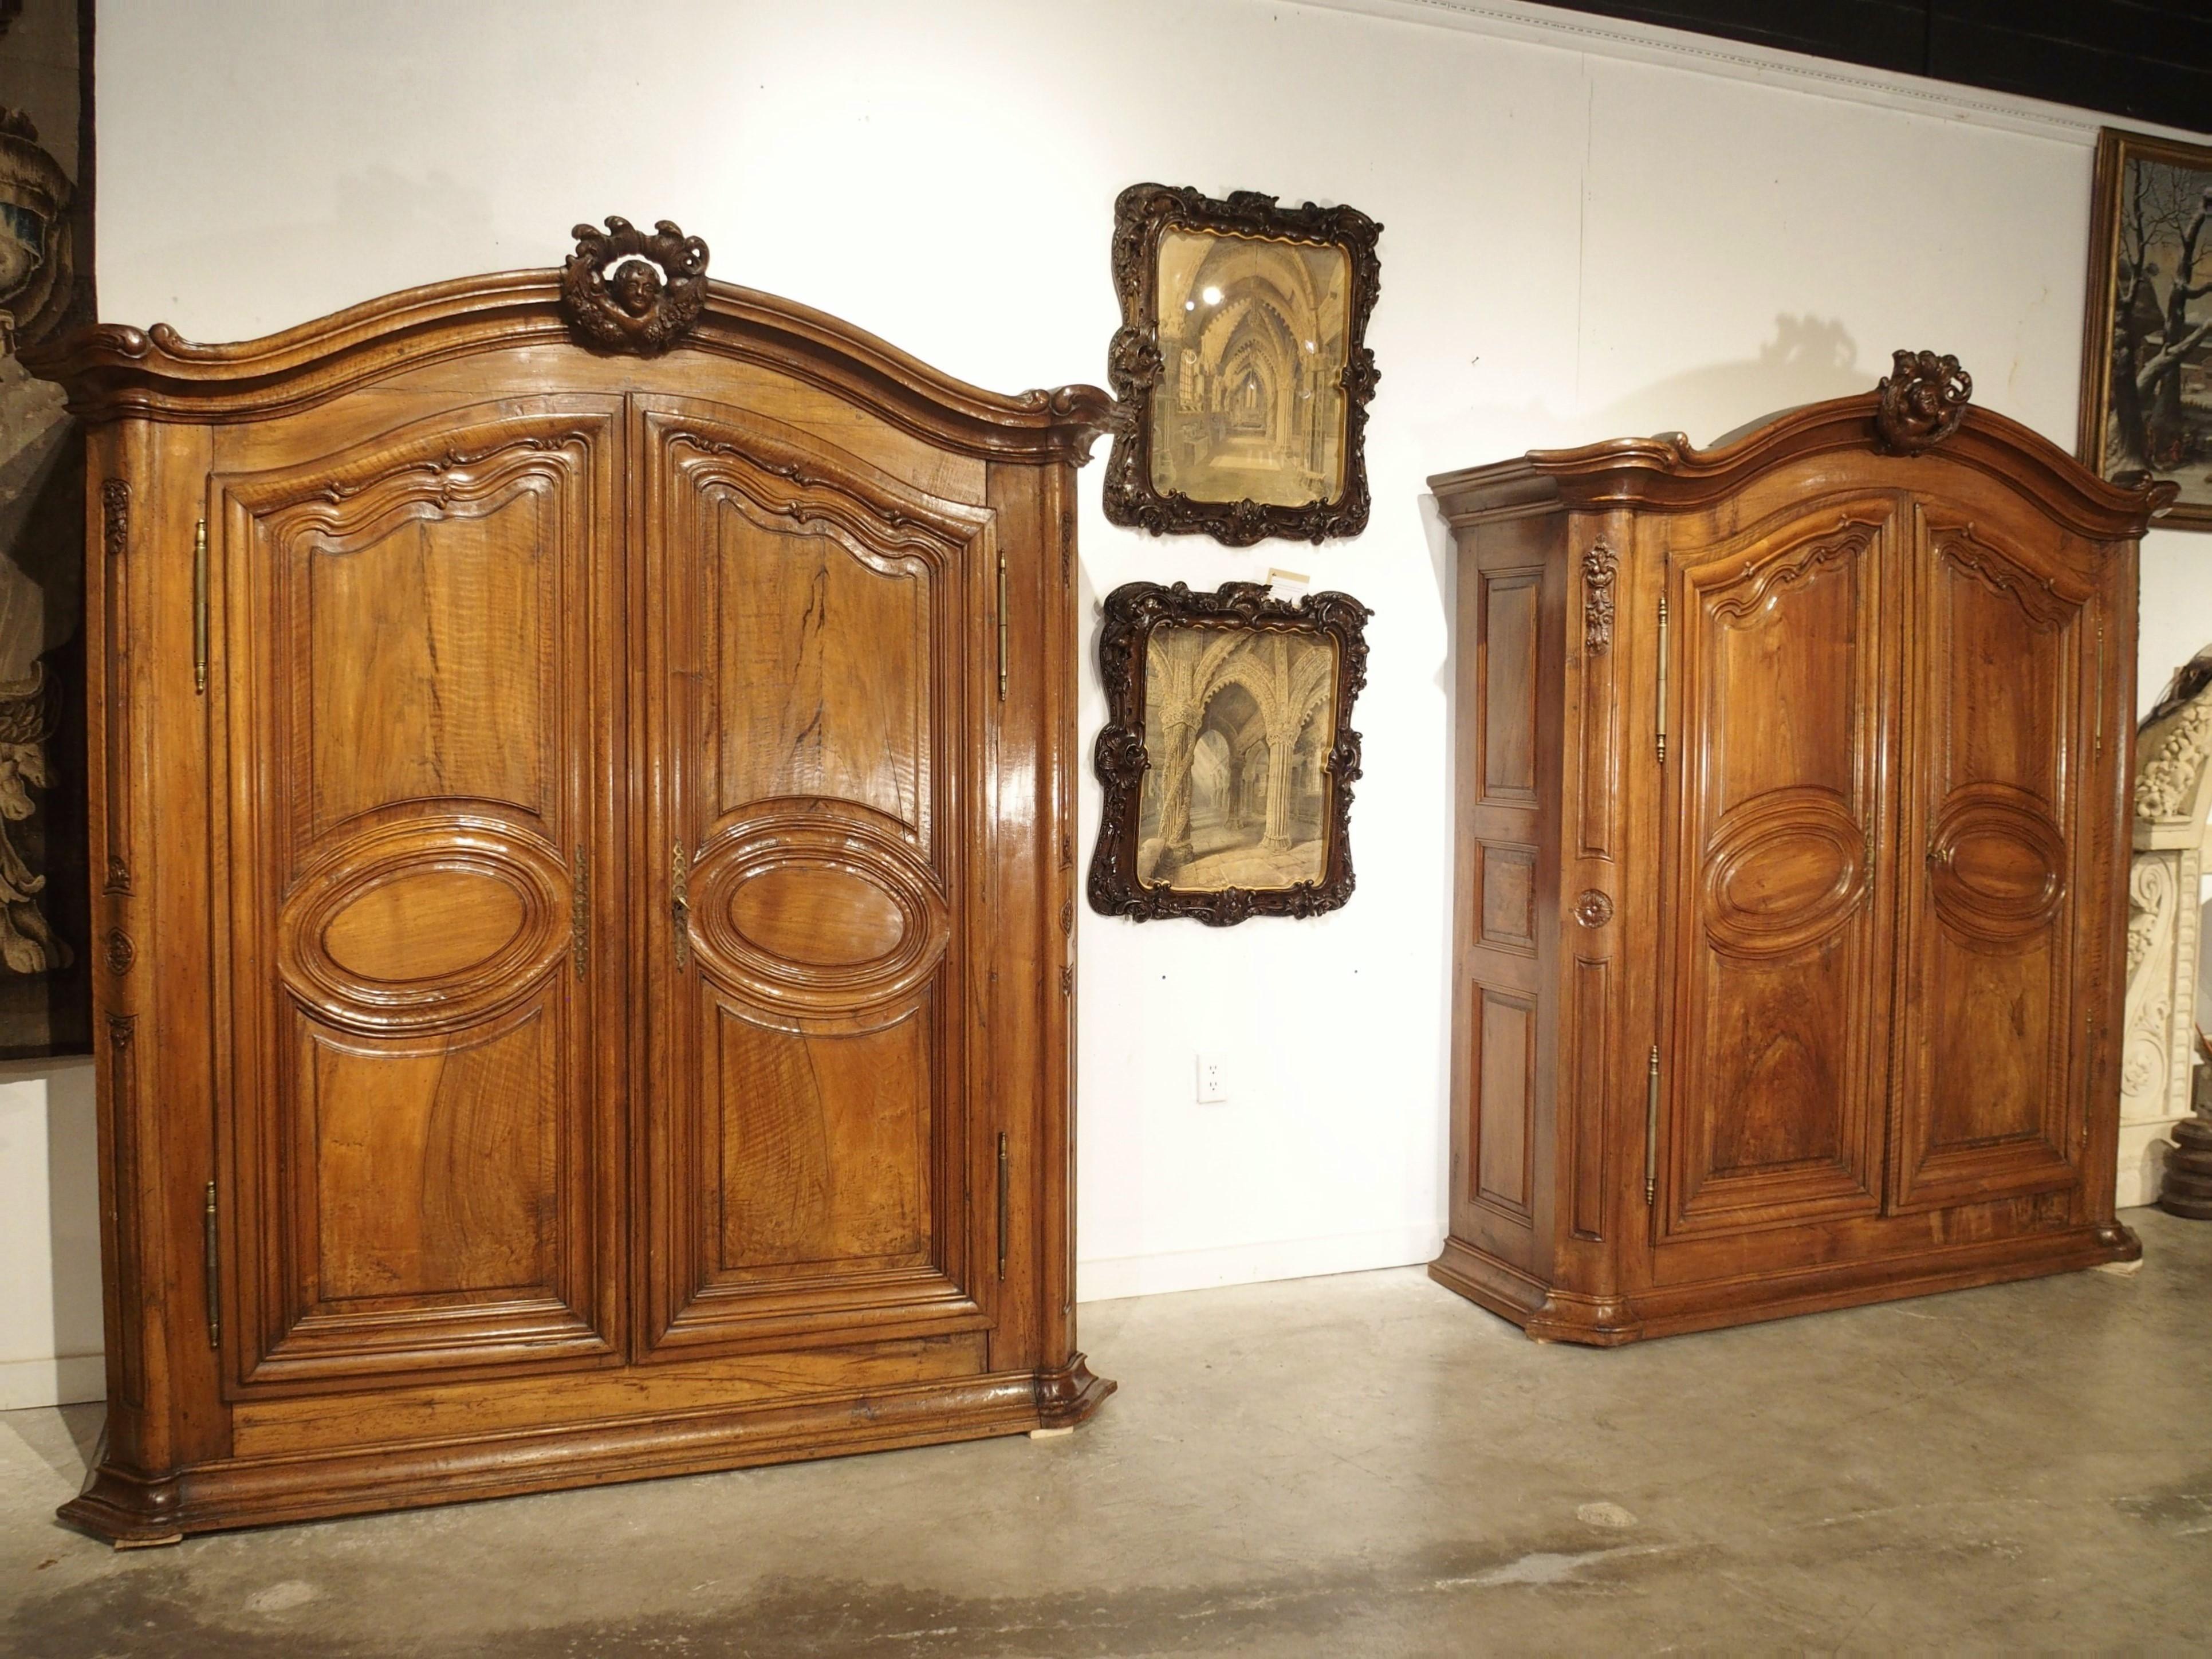 This rare pair of walnut and olive wood armoires is from Eastern France. The armoires were specially commissioned in the early 1700’s and at one point were property of a chocoladefabriek (chocolate factory) in Strasbourg, located in the region of